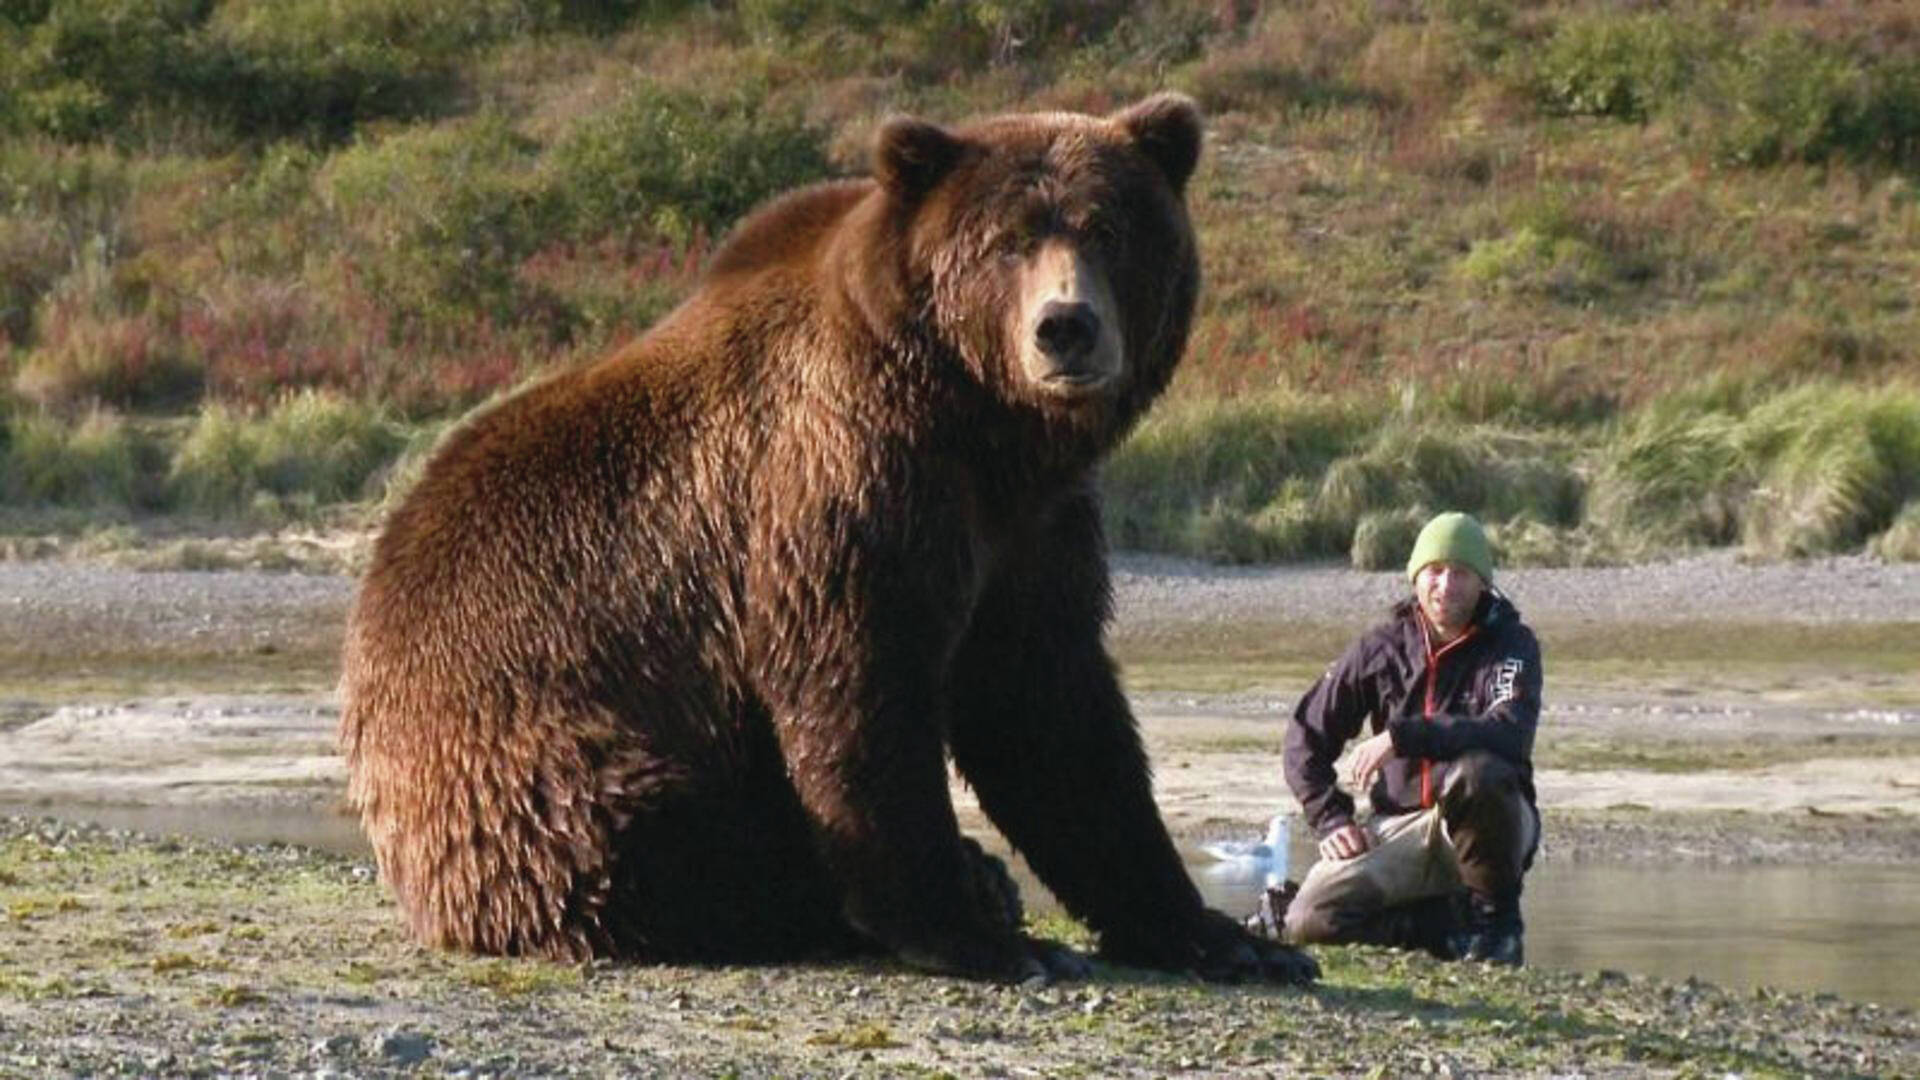 A still from “Der baer in mir (the Bear in Me)” showing at the 17th annual Homer Documentary Film Festival. (Photo provided)